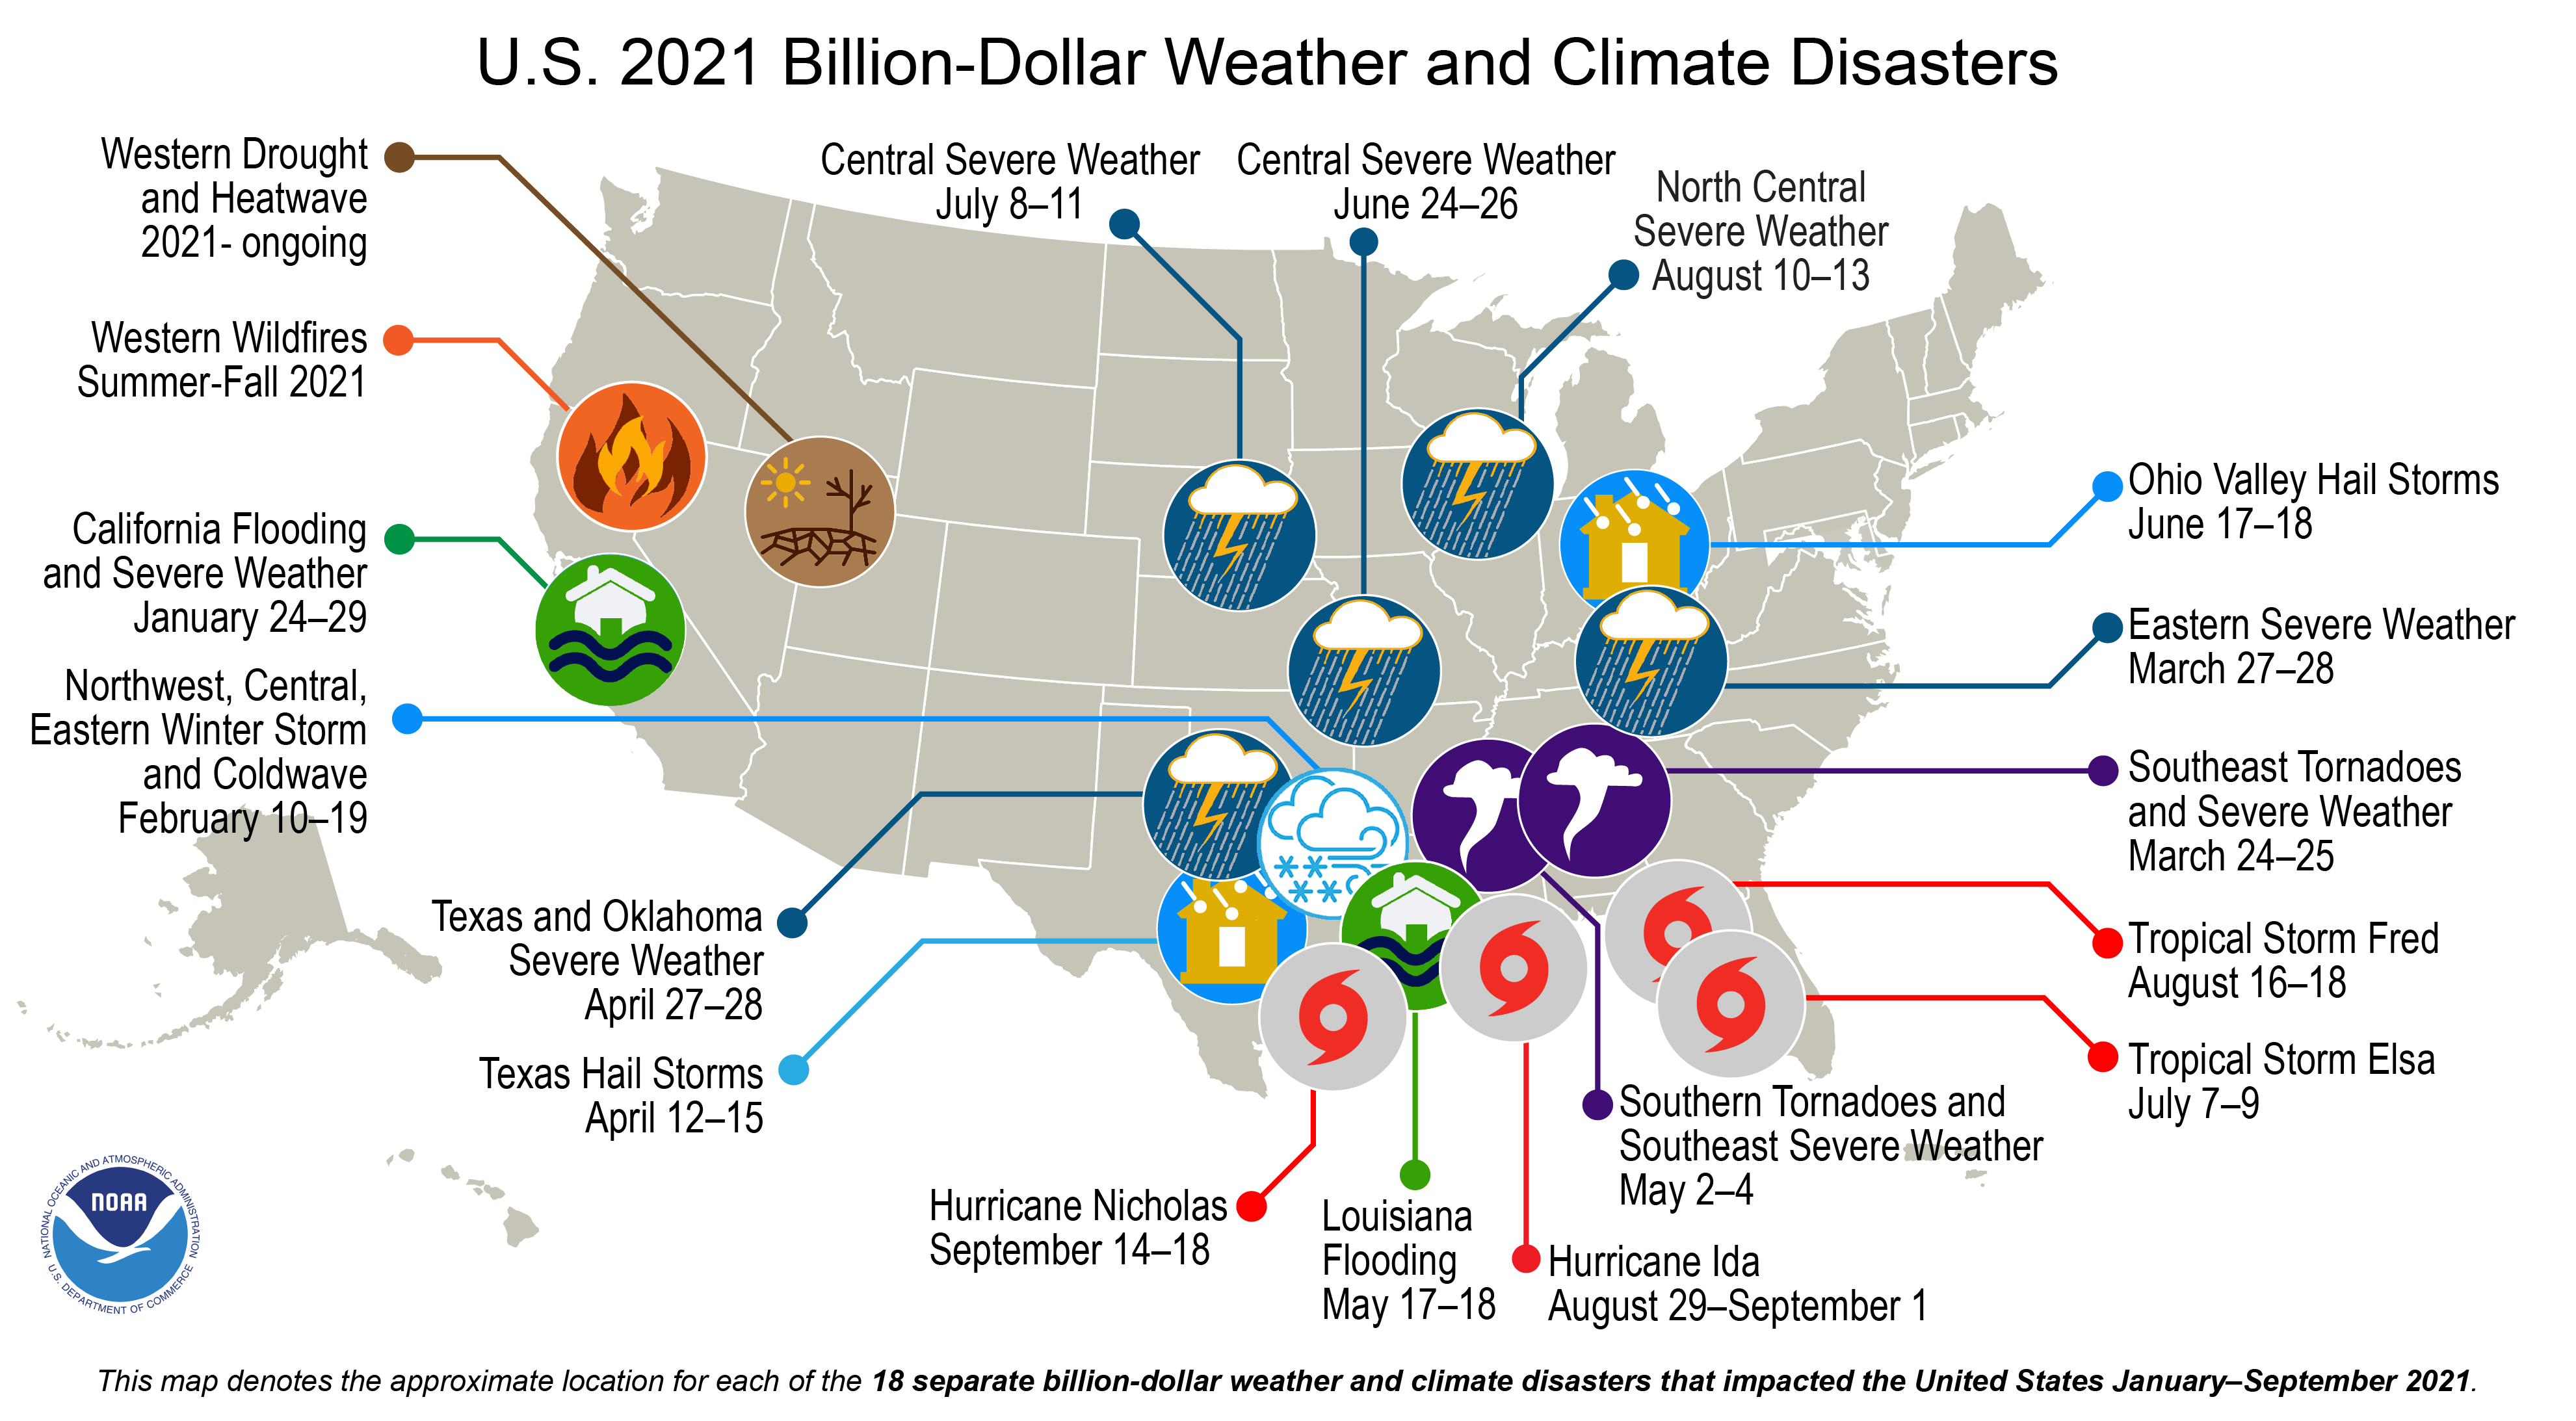 A map of the United States plotted with 18 weather and climate disasters each costing $1 billion or more that occurred between January and September 30, 2021.